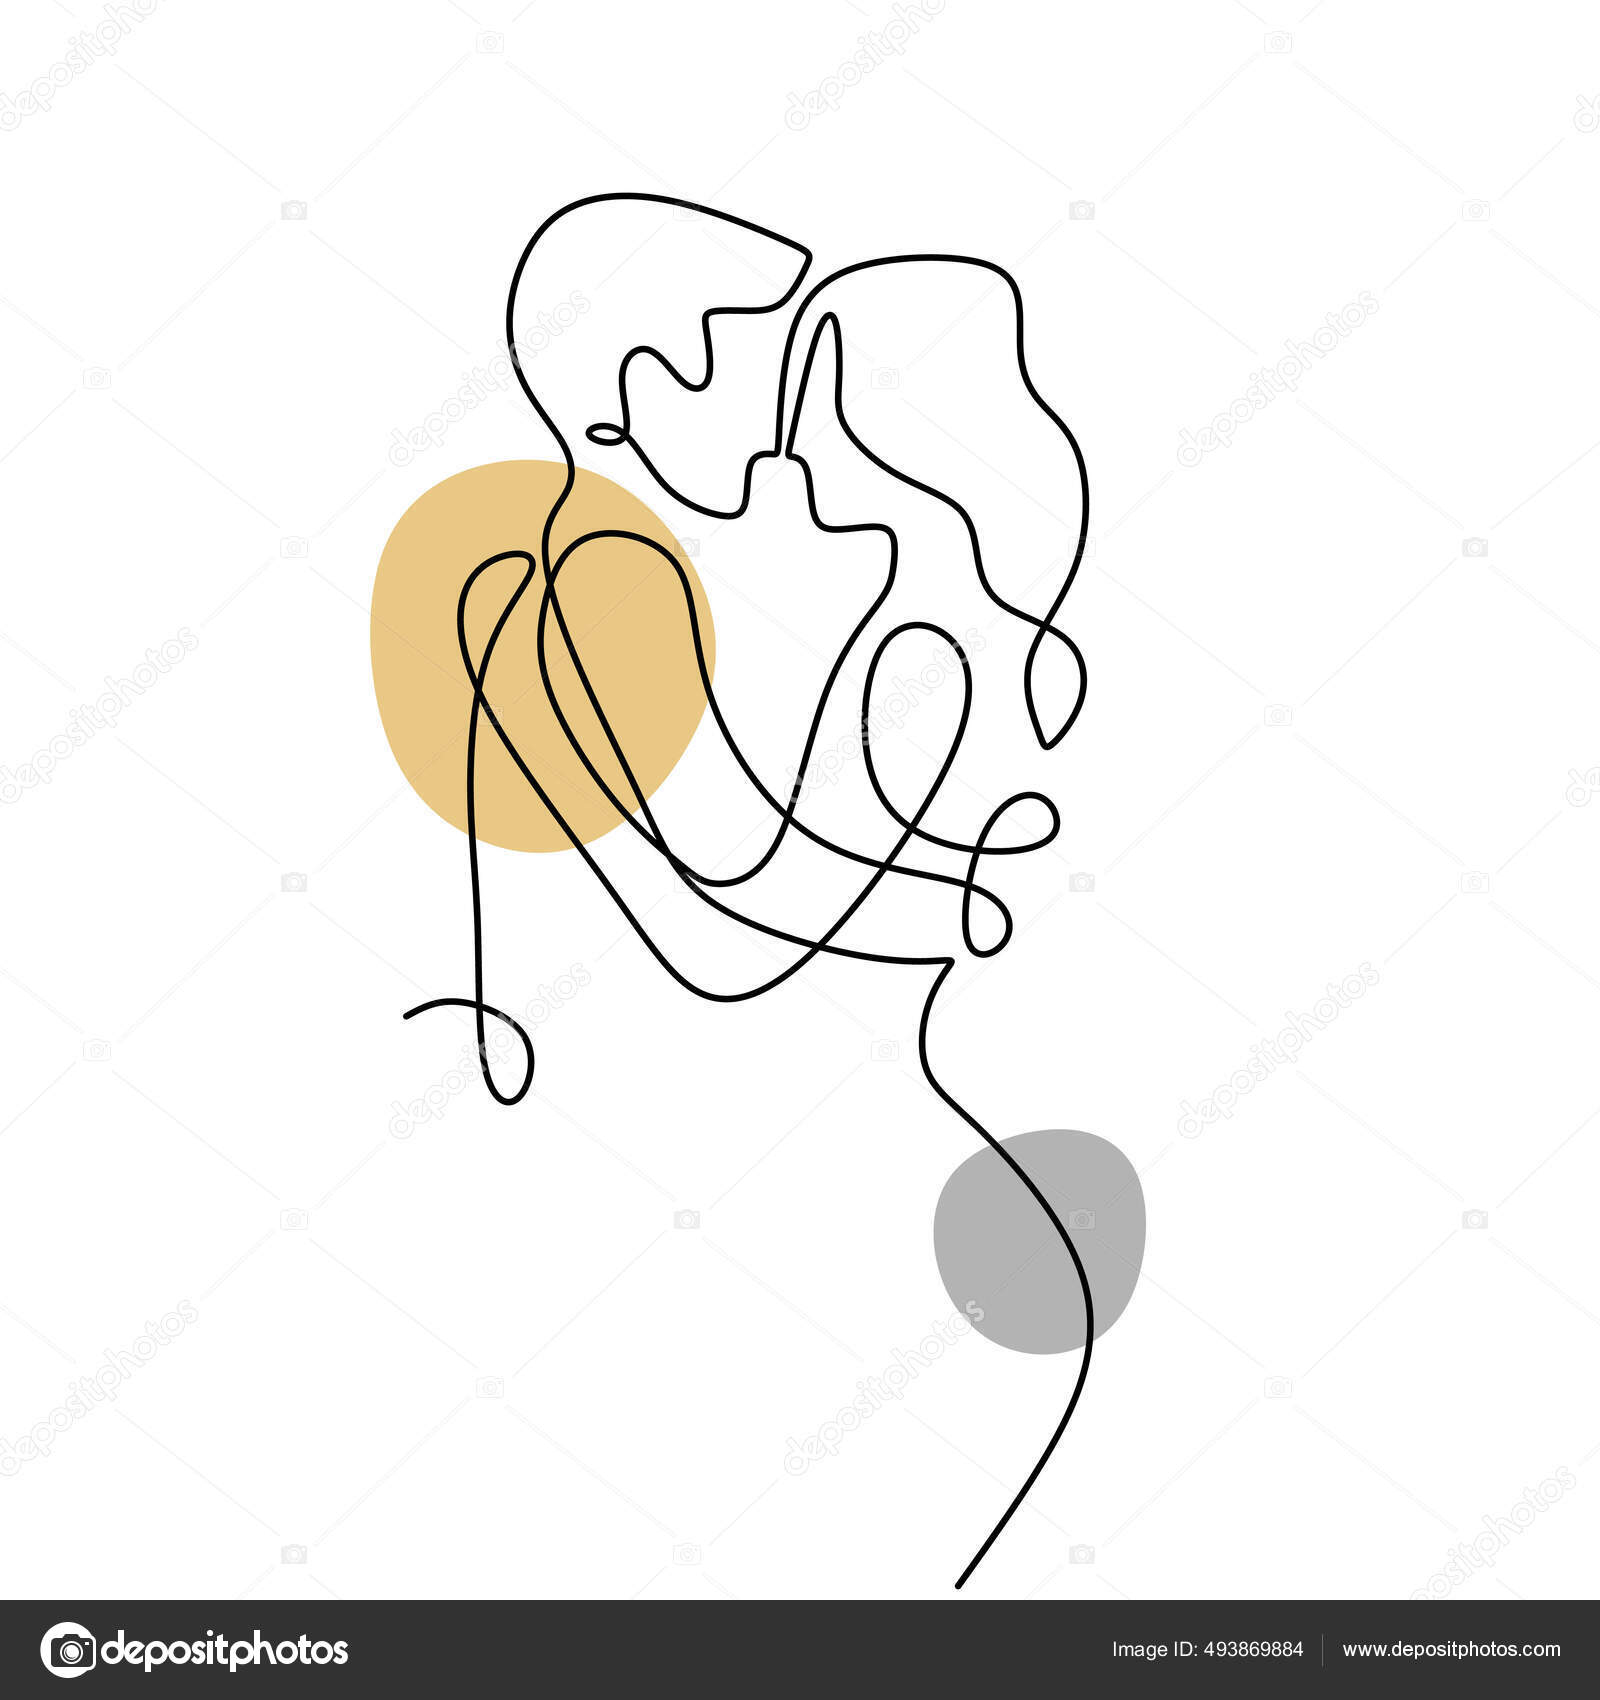 Romantic couple drawing step by step / easy couple drawing 